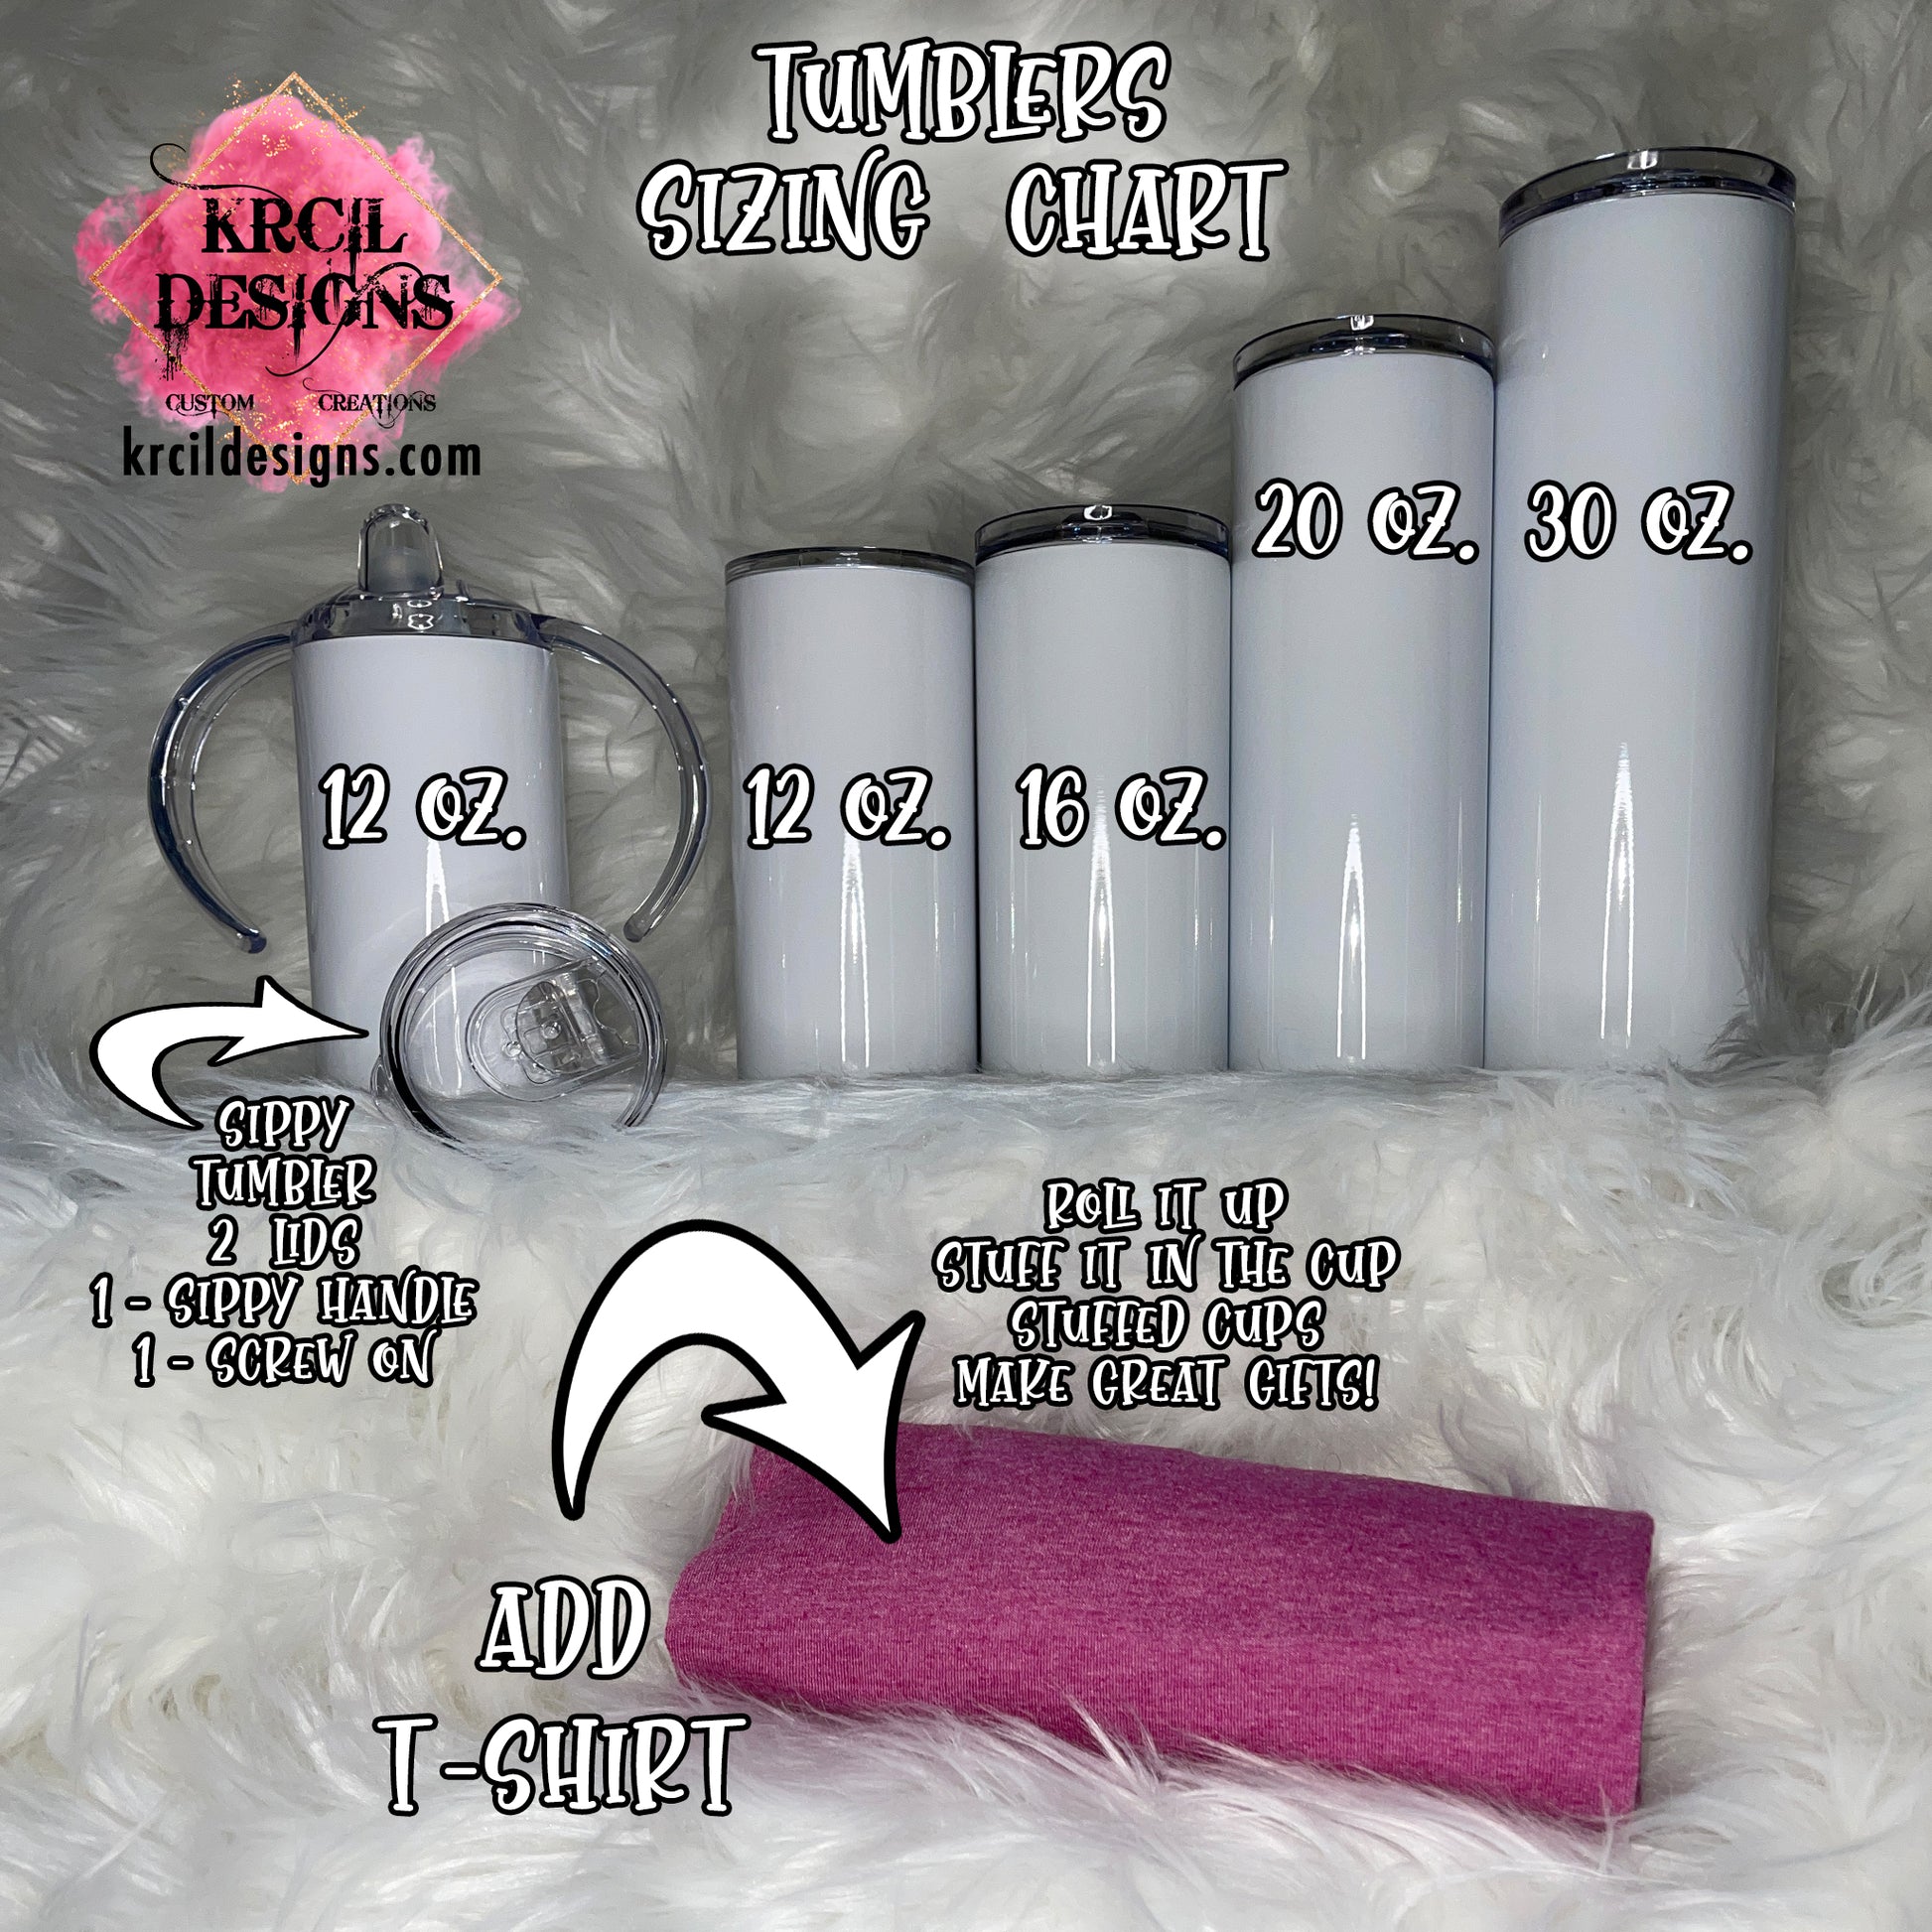 https://krcildesigns.com/cdn/shop/files/PICTURE-COLLAGE-PHOTO-TUMBLERS-CUPS-SIZING-CHART-krcildesigns.com.jpg?v=1701883123&width=1946